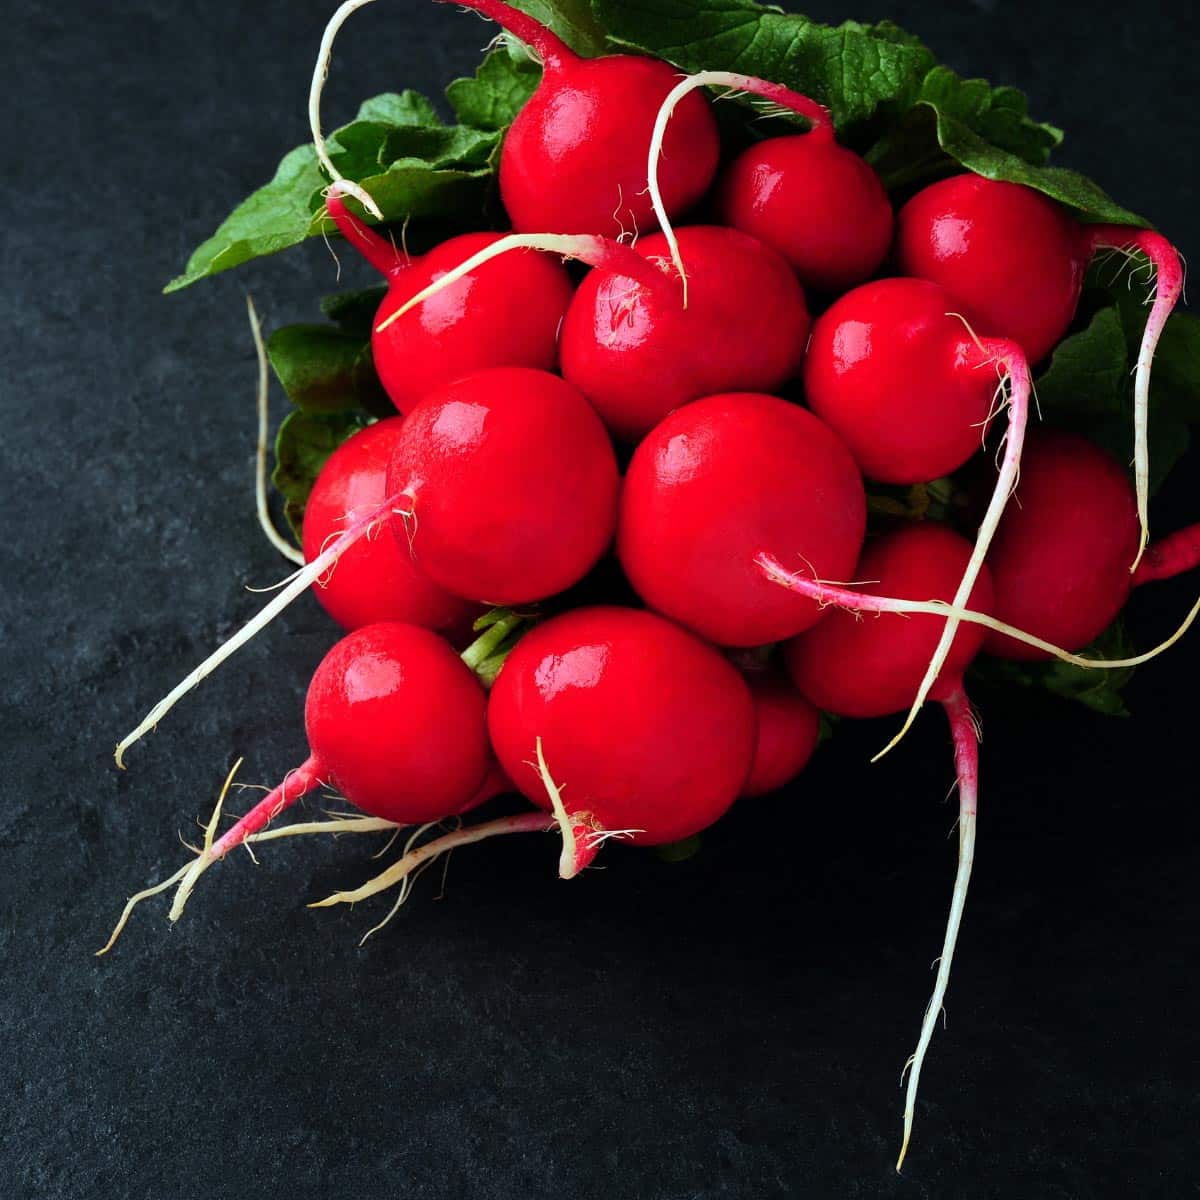 Red radishes on a black countertop.